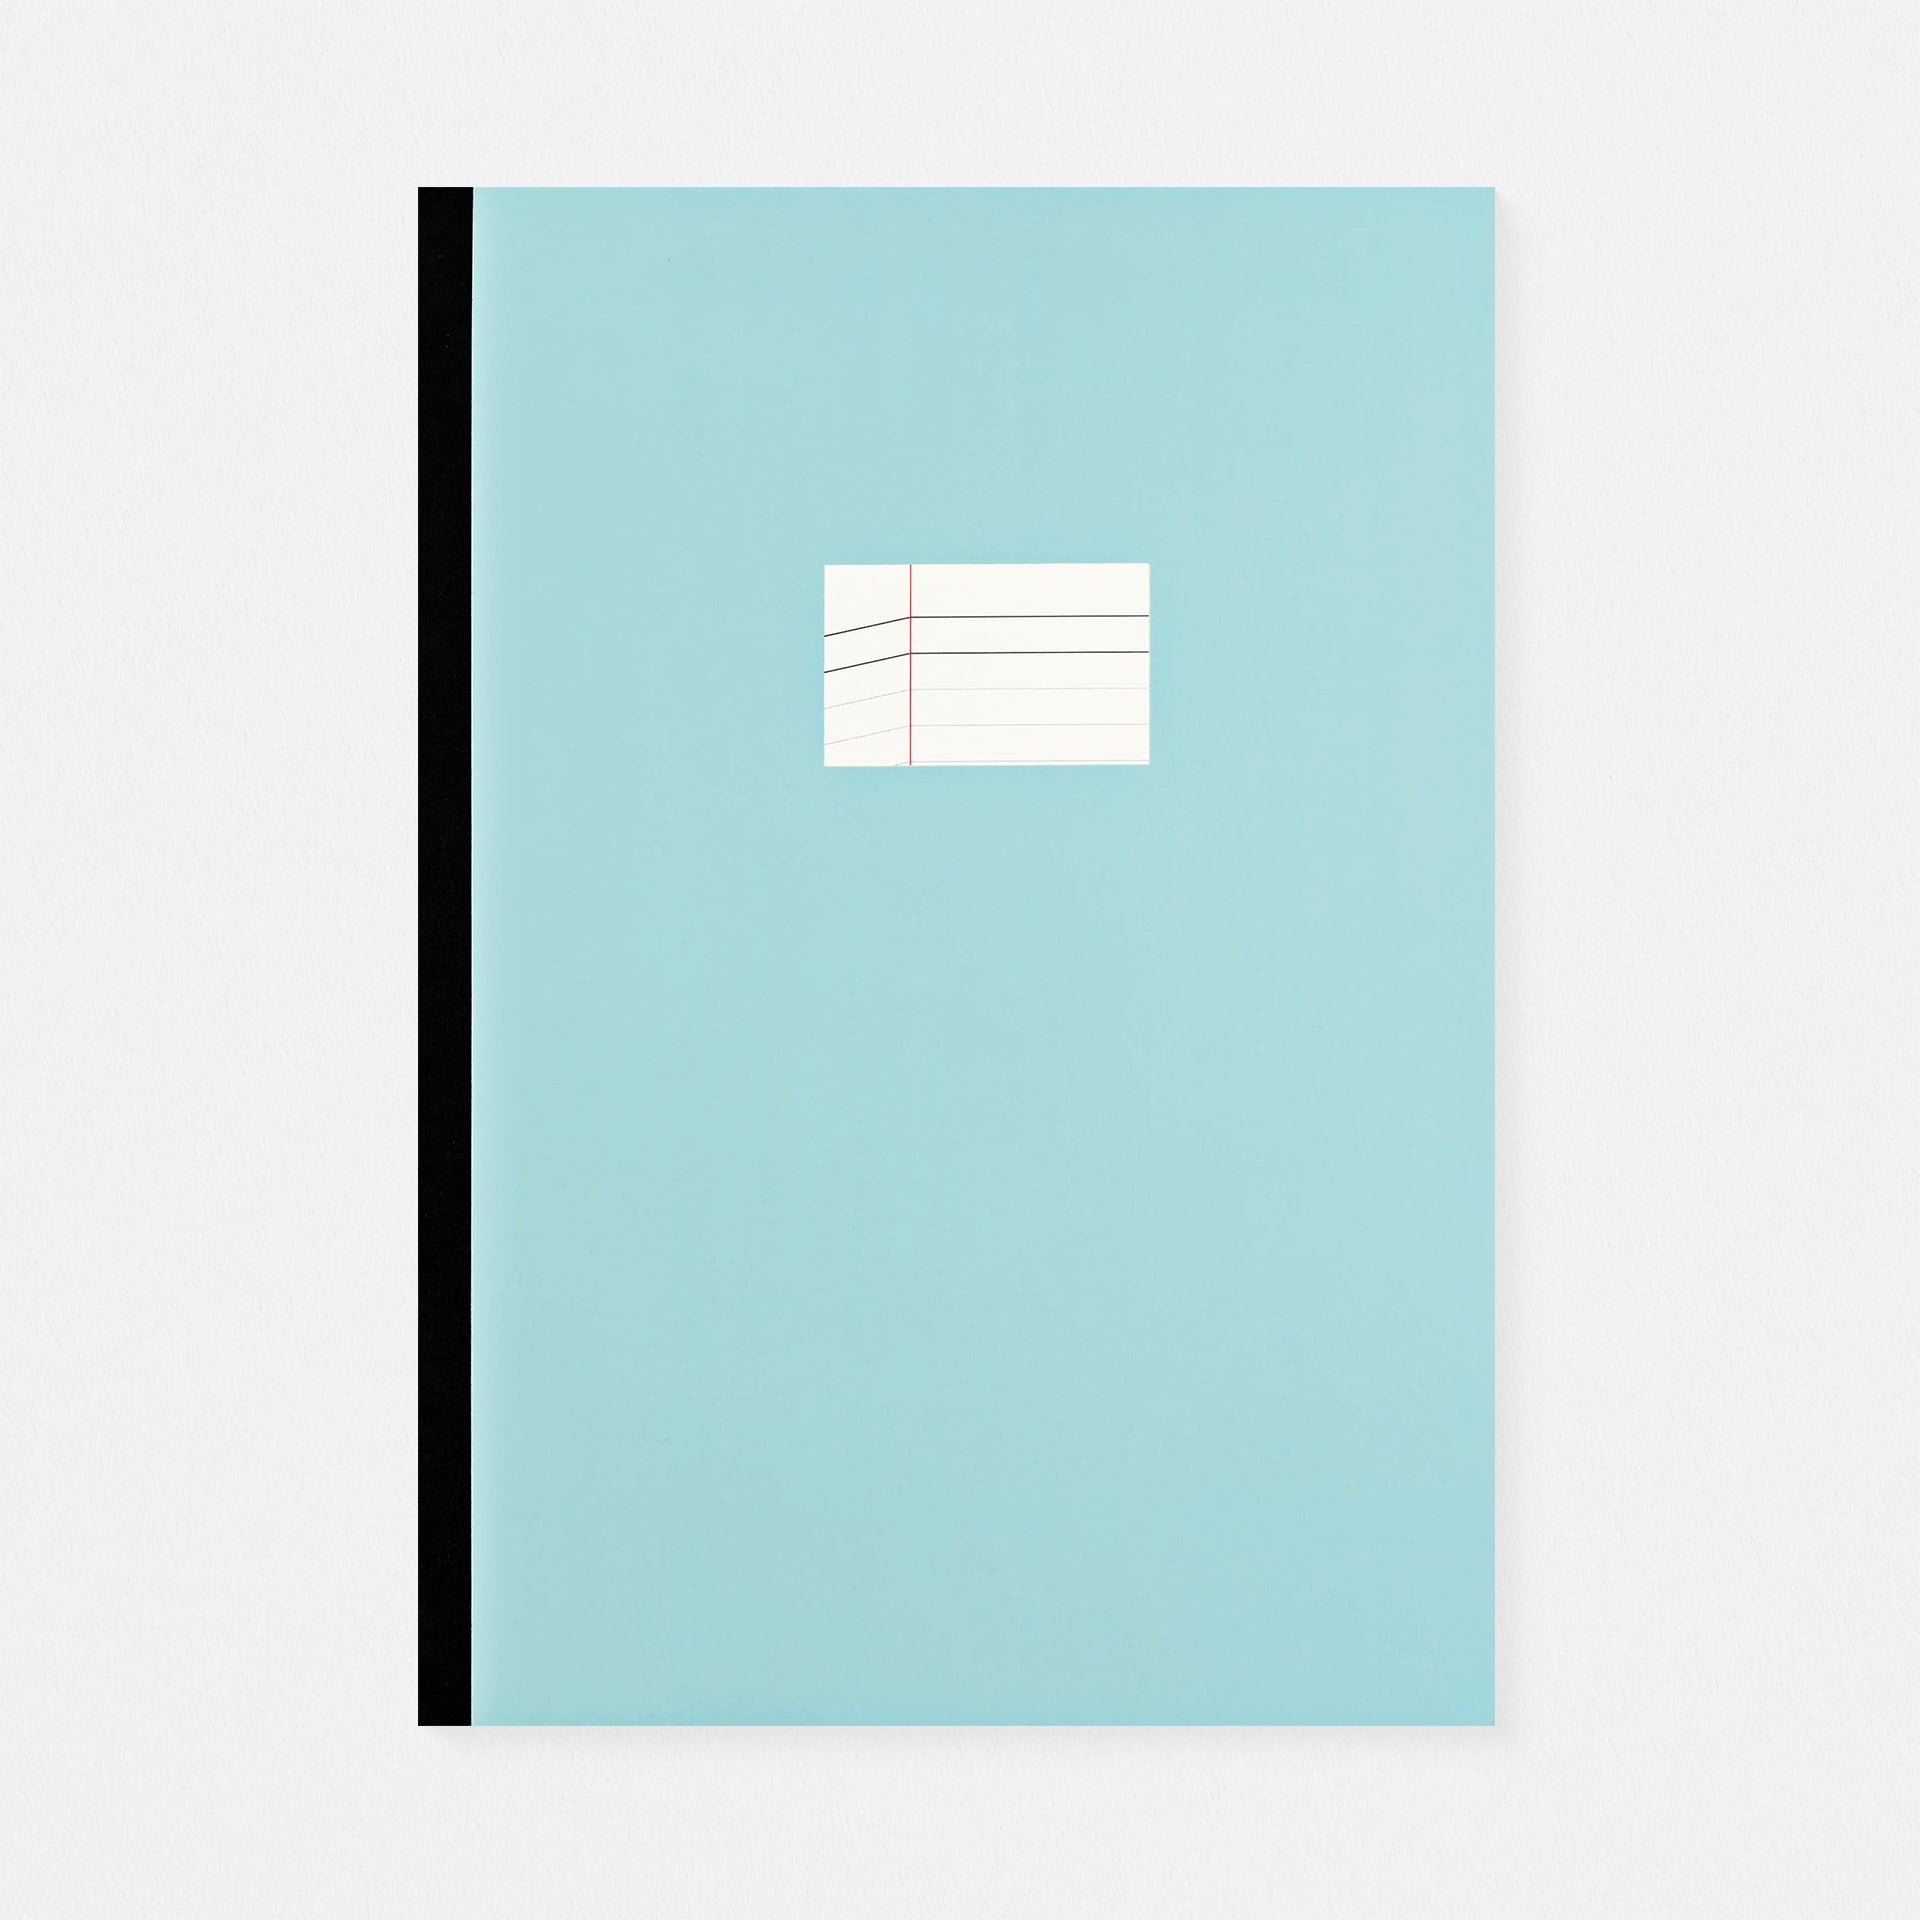 Paperways Large Notebook Ruled & Folded Skyblue 